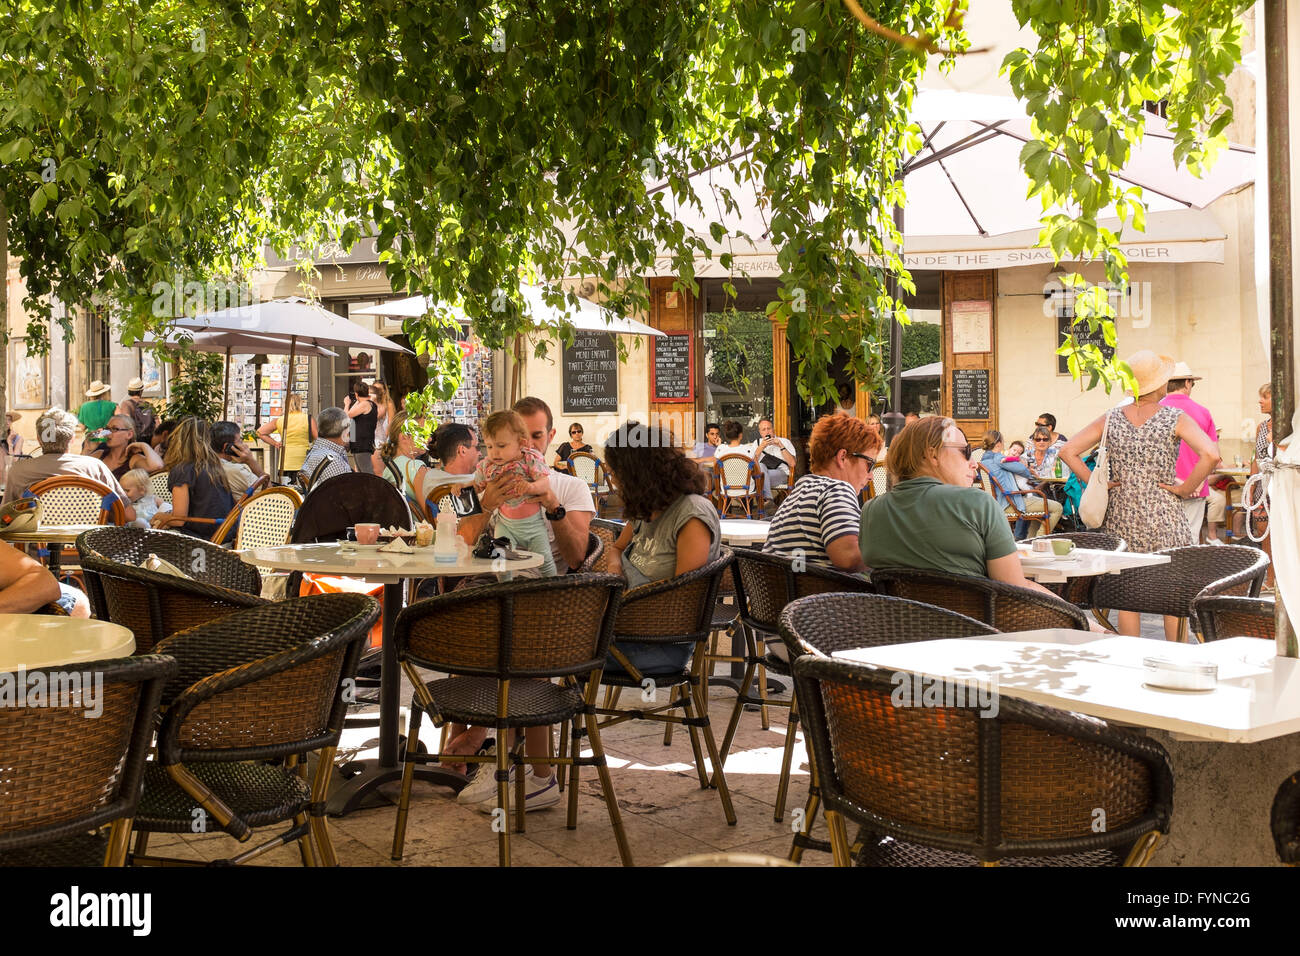 Holidaymakers relaxing in a pavement cafe, Lourmarin, Luberon, Vaucluse, Provence-Alpes-Côte d'Azur, France Stock Photo